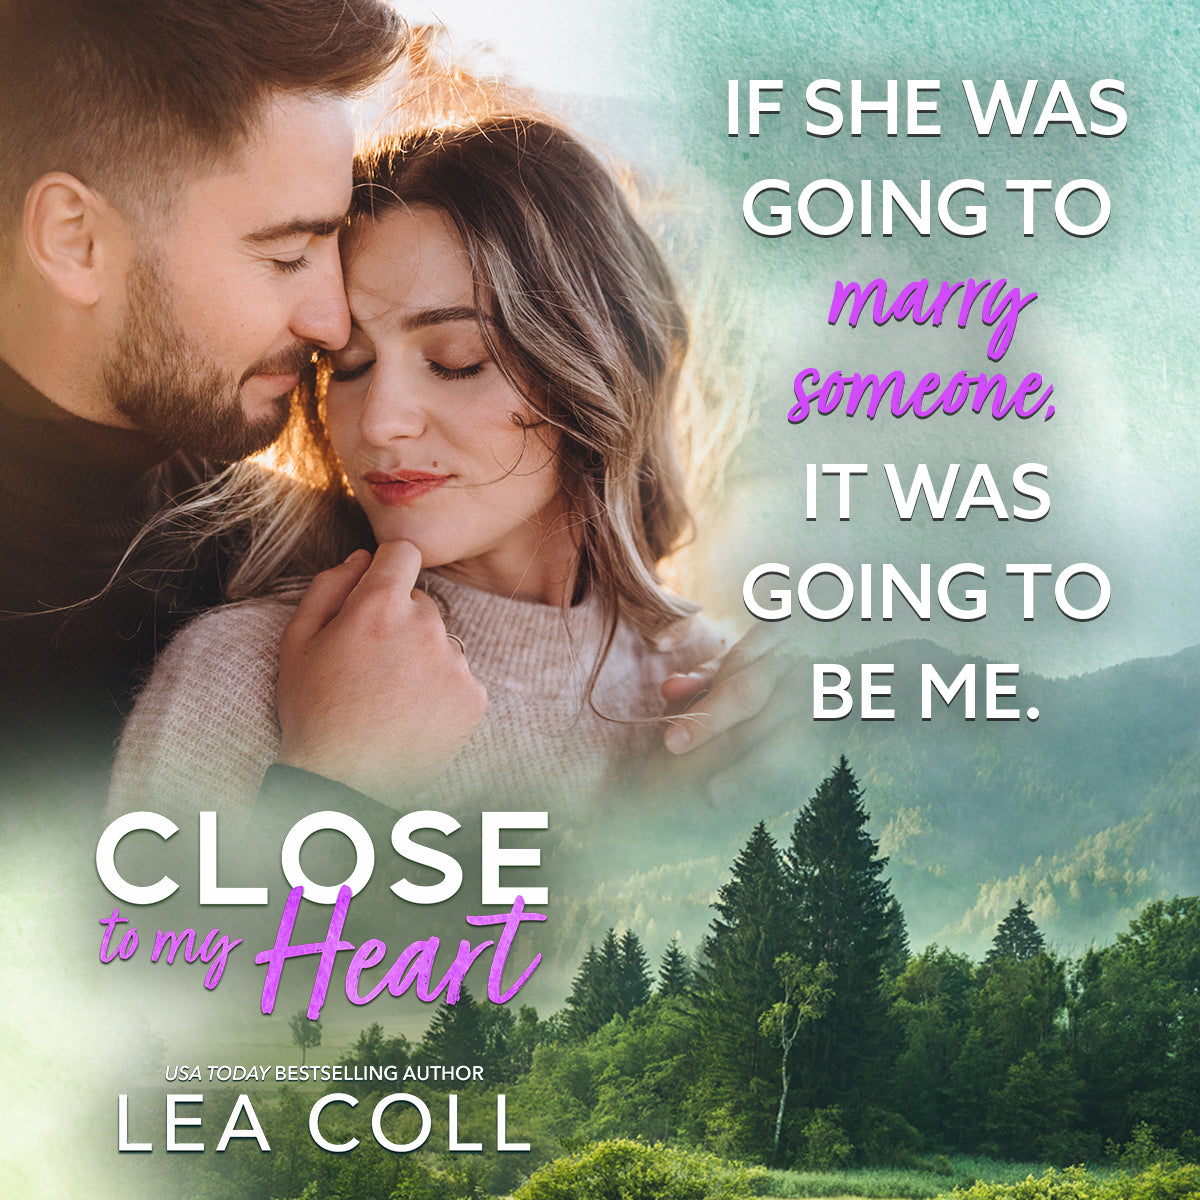 Close to My Heart Ebook